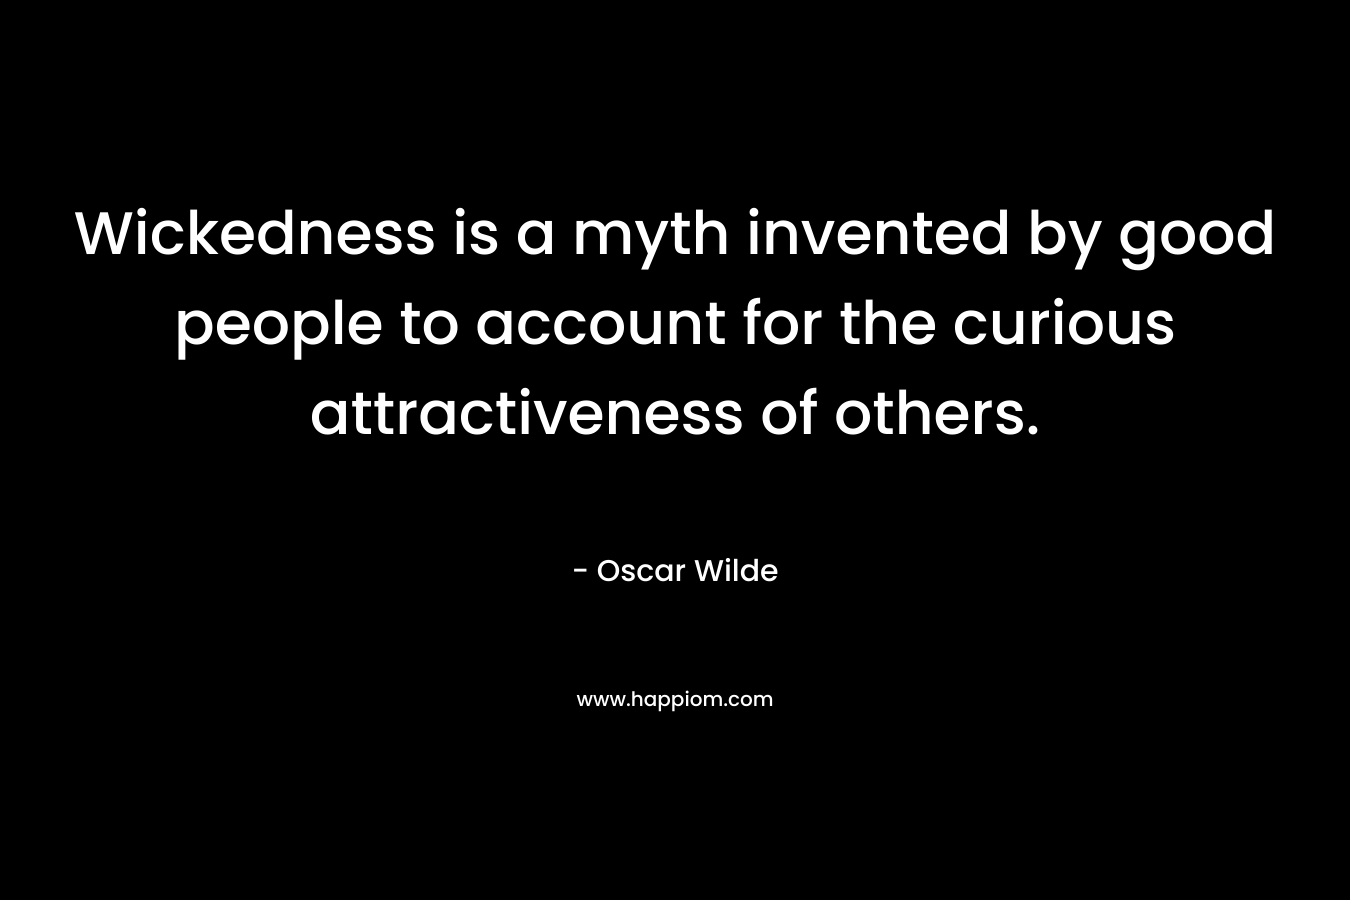 Wickedness is a myth invented by good people to account for the curious attractiveness of others. – Oscar Wilde